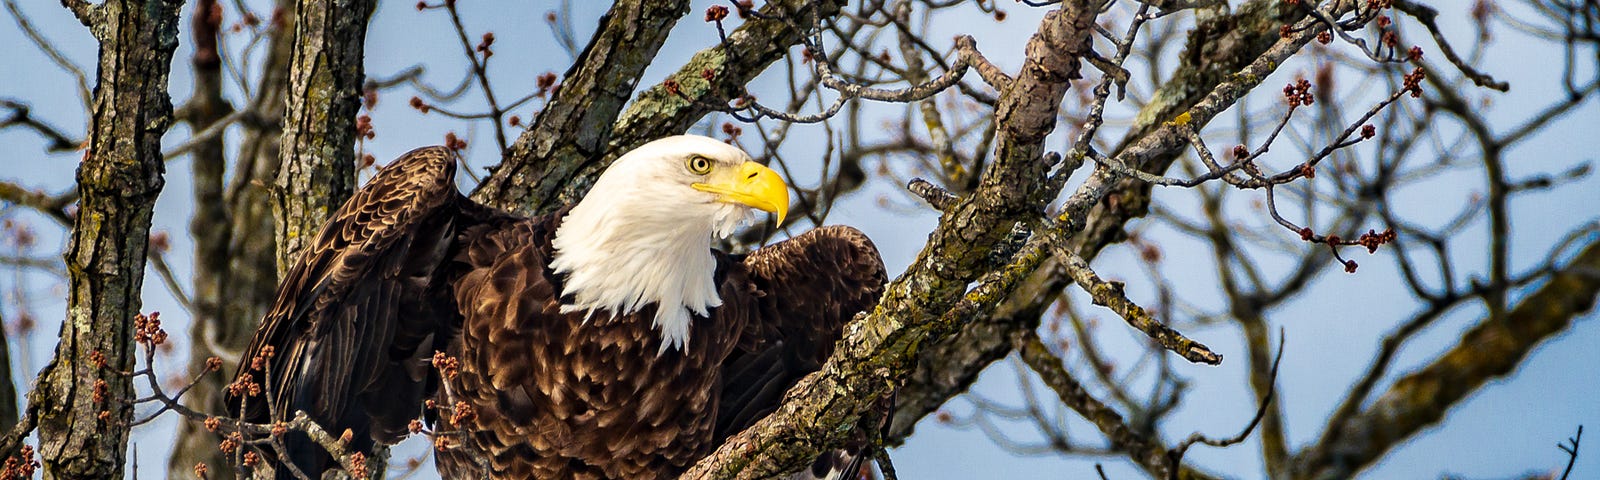 Bald eagle perched near Nelson, Wisconsin, in a Mississippi River backwater.